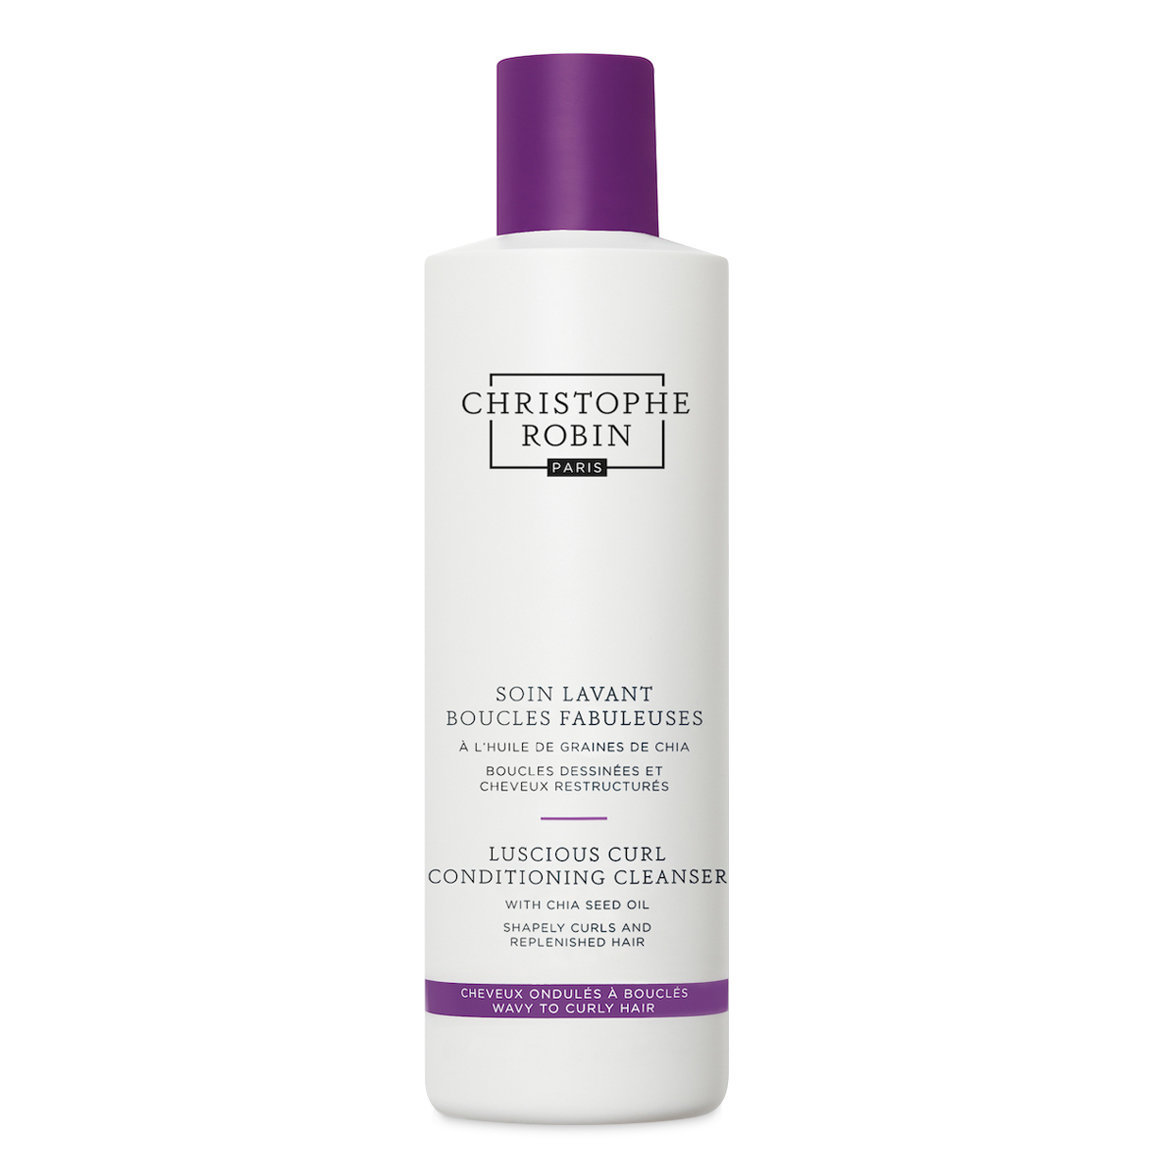 Christophe Robin Luscious Curl Conditioning Cleanser with Chia Seed Oil alternative view 1 - product swatch.